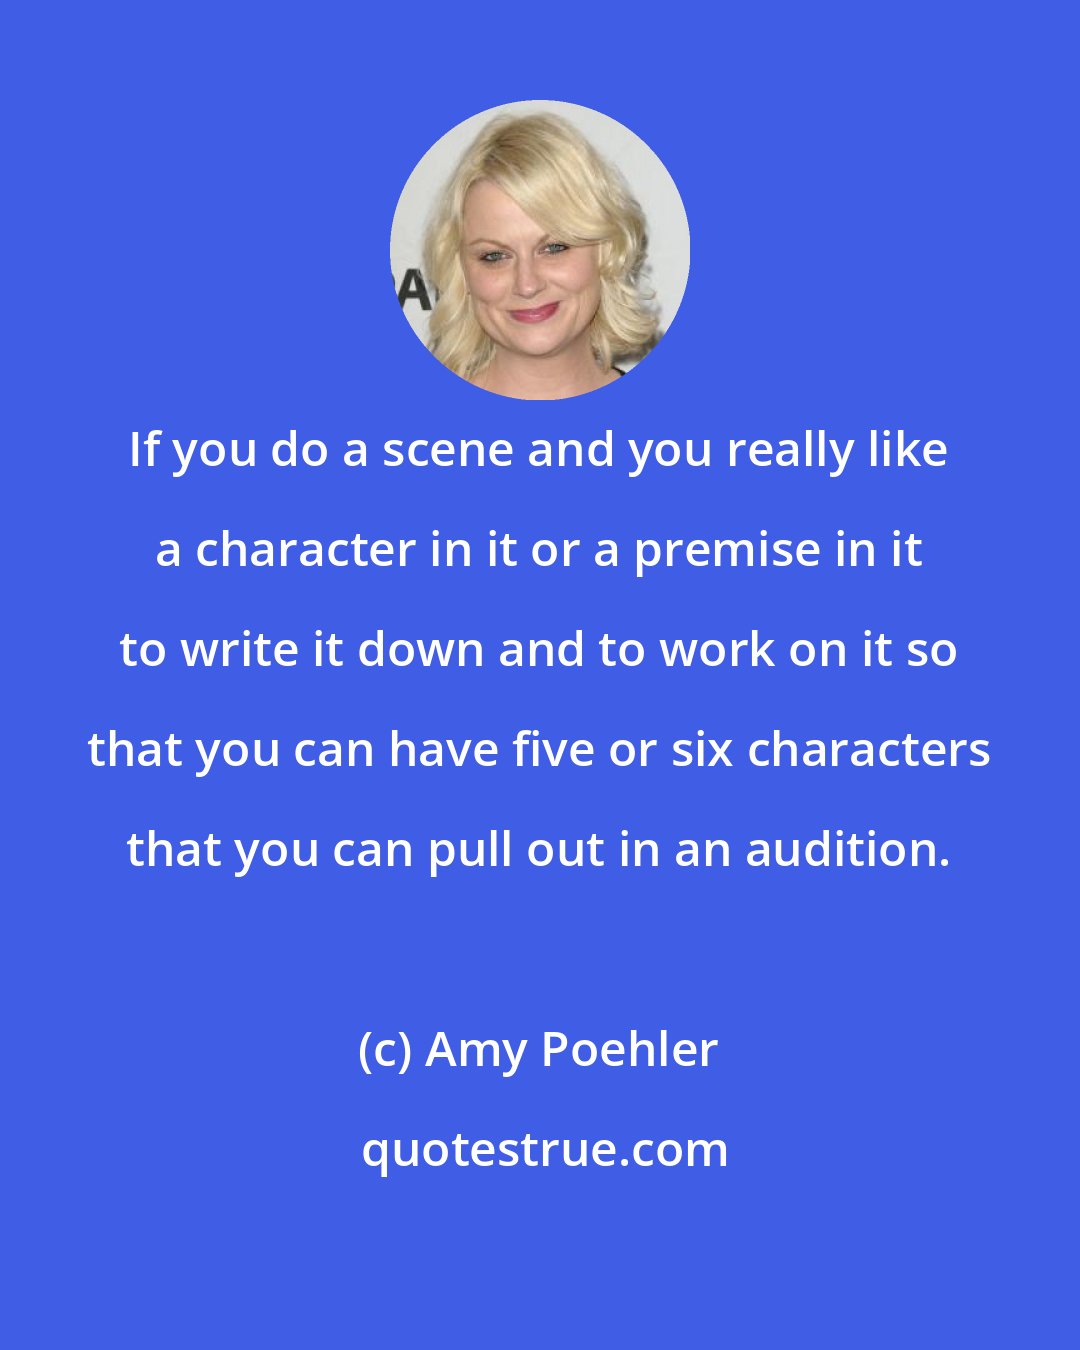 Amy Poehler: If you do a scene and you really like a character in it or a premise in it to write it down and to work on it so that you can have five or six characters that you can pull out in an audition.